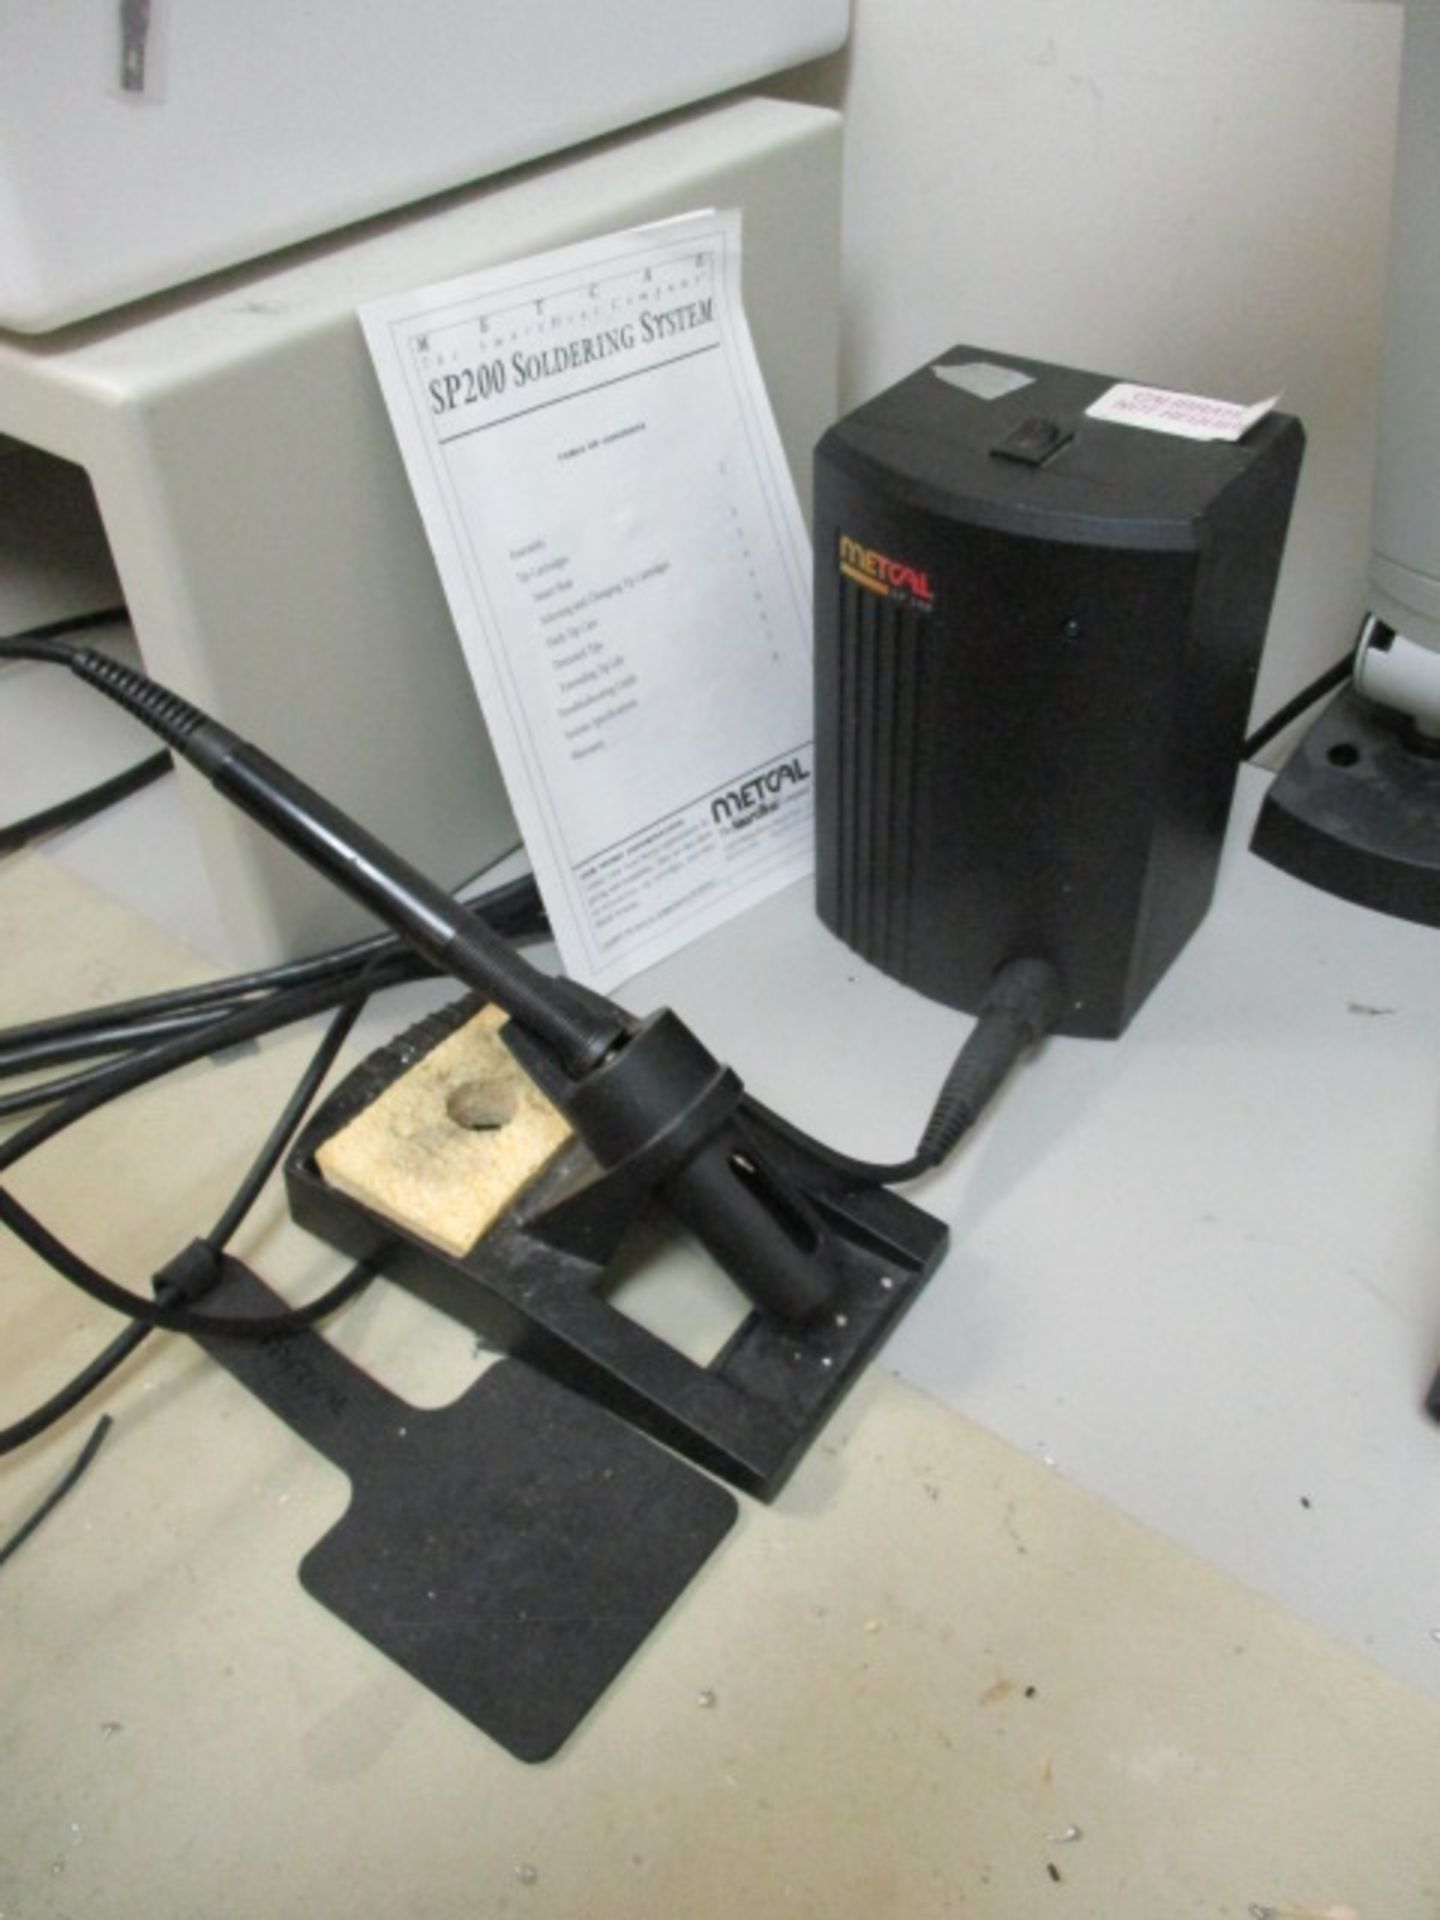 Metcal SP2100/SP-PW1-10 Soldering System. LOC: Area-5. Asset Located At Clarity Medical Systems,